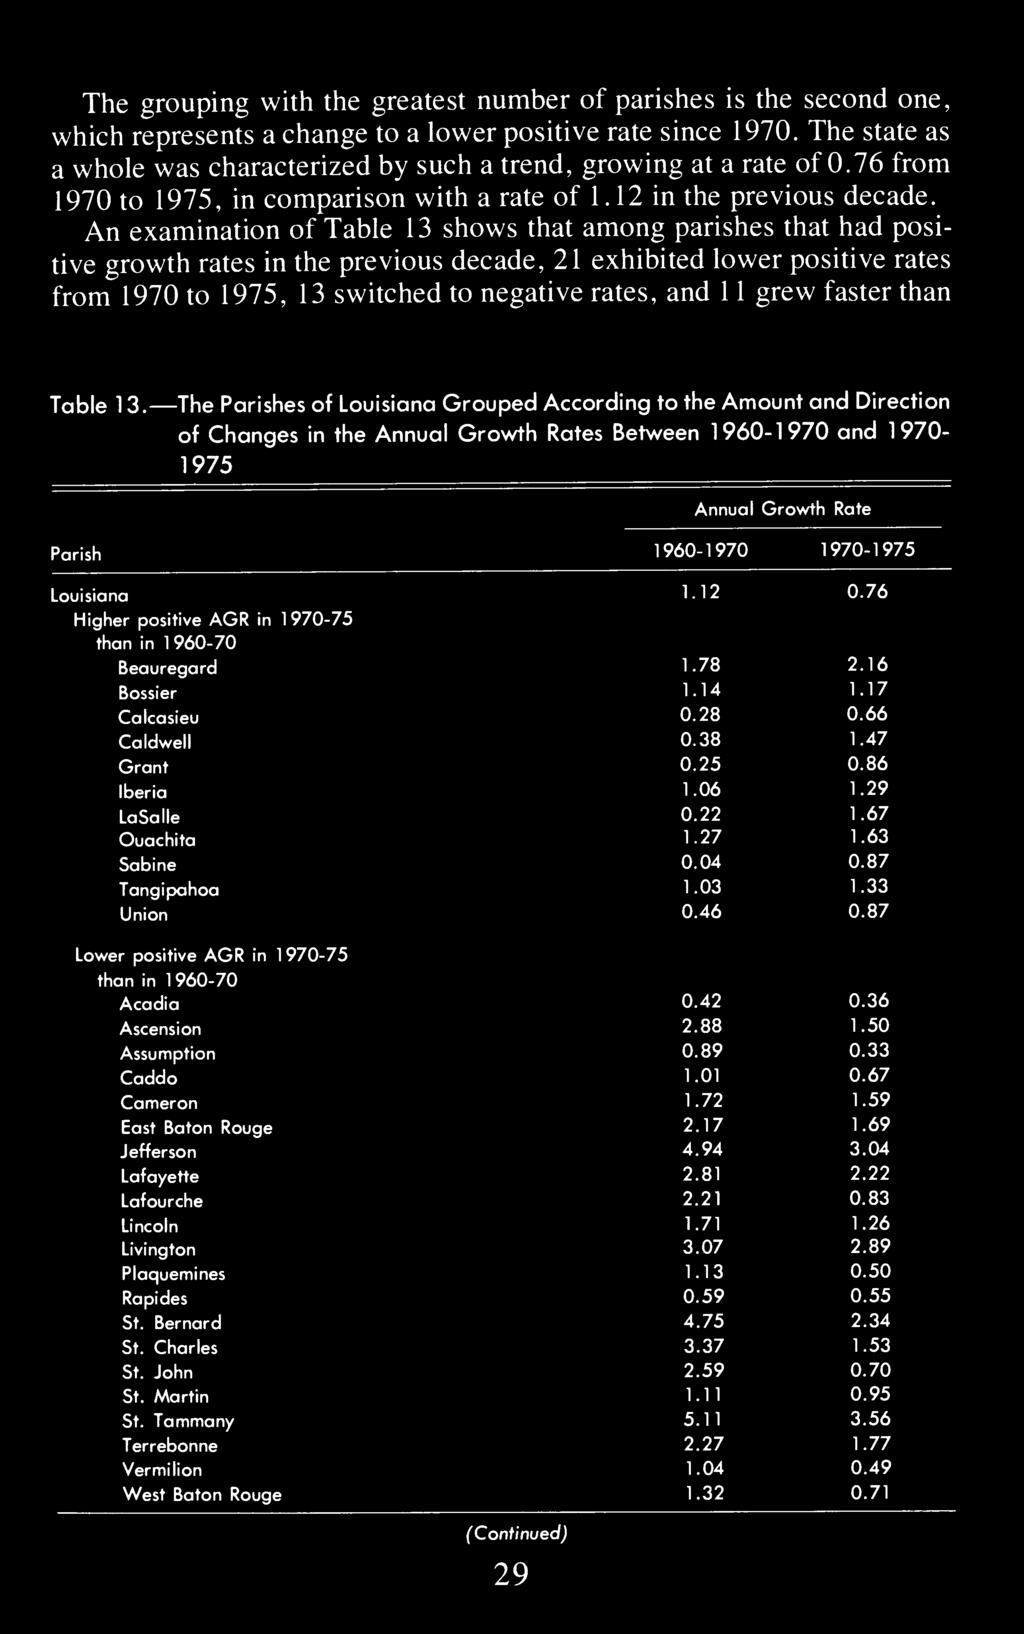 An examination of Table 13 shows that among parishes that had positive growth rates in the previous decade, 21 exhibited lower positive rates from 1970 to 1975, 13 switched to negative rates, and 1 1